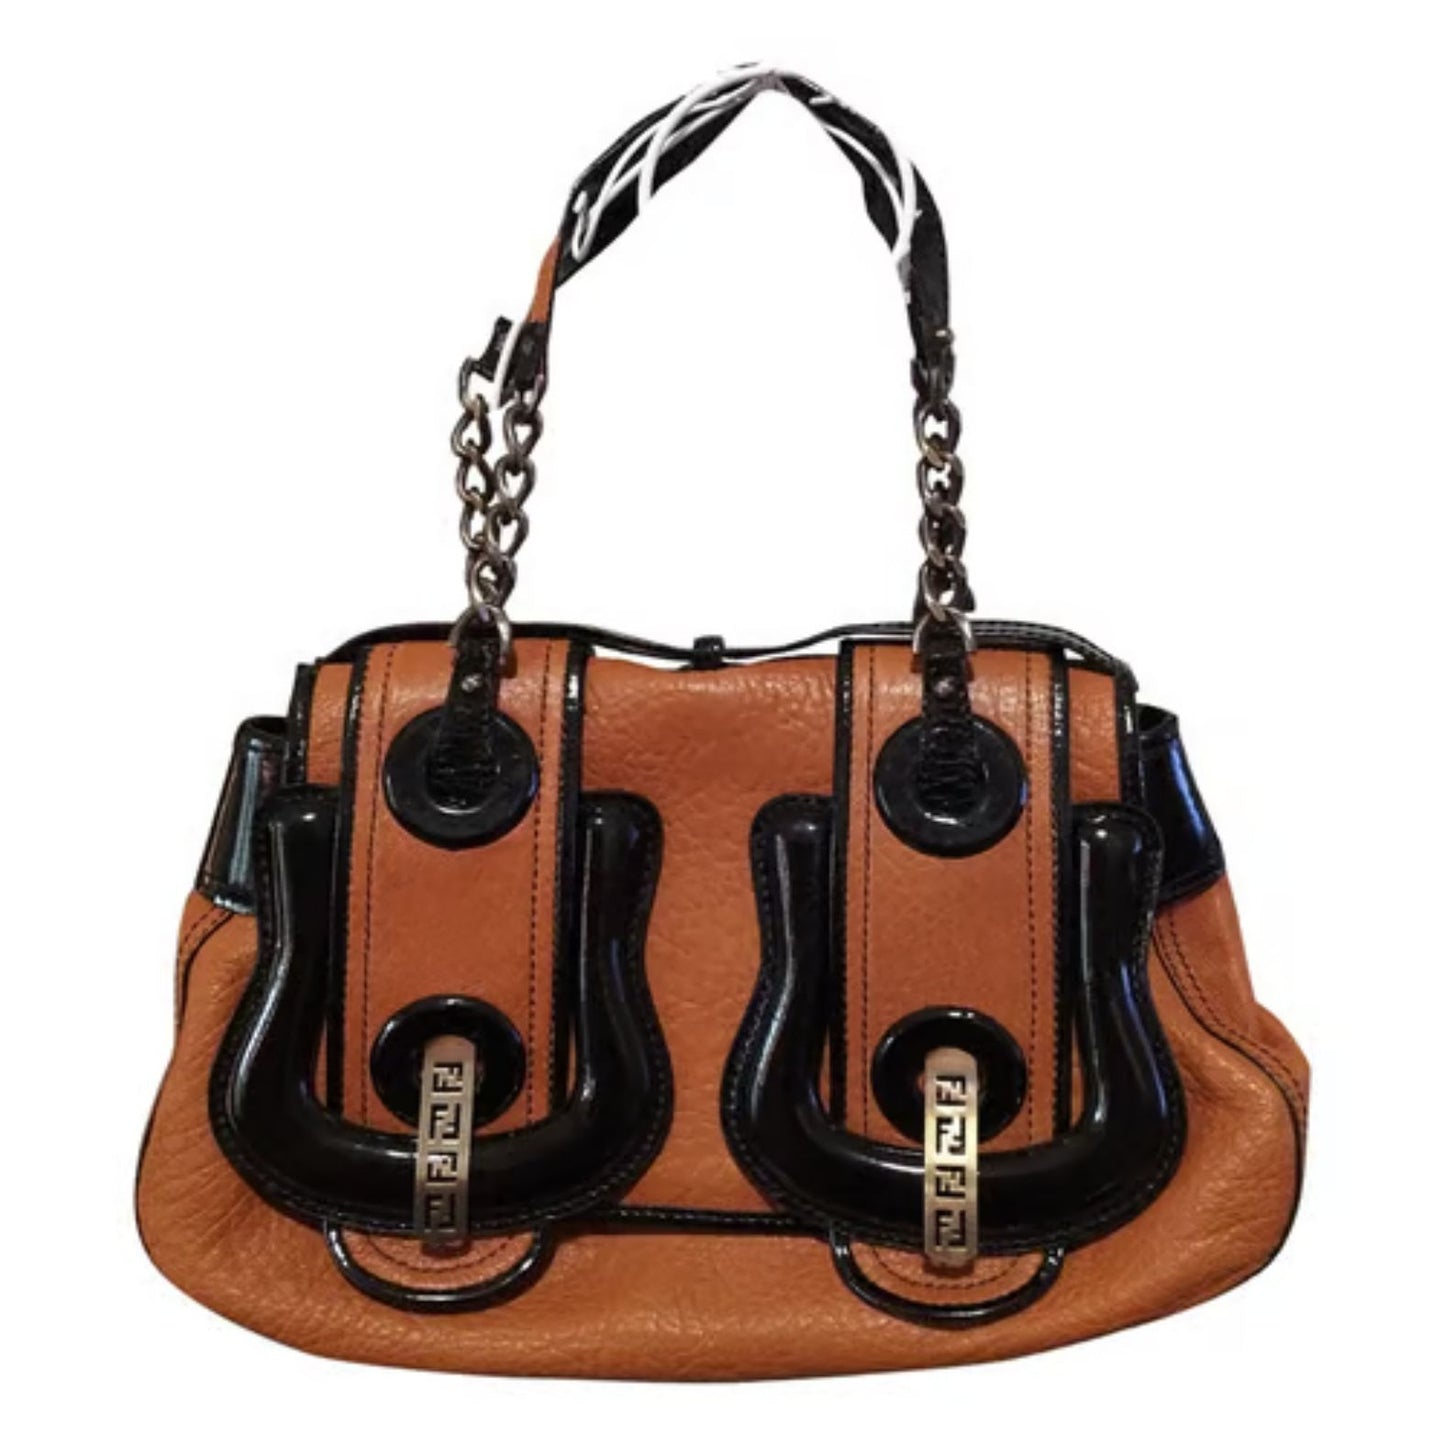 Fendi B Buckle style XL satchel style purse in caramel leather & black patent leather with two antique gold finish chain accent straps